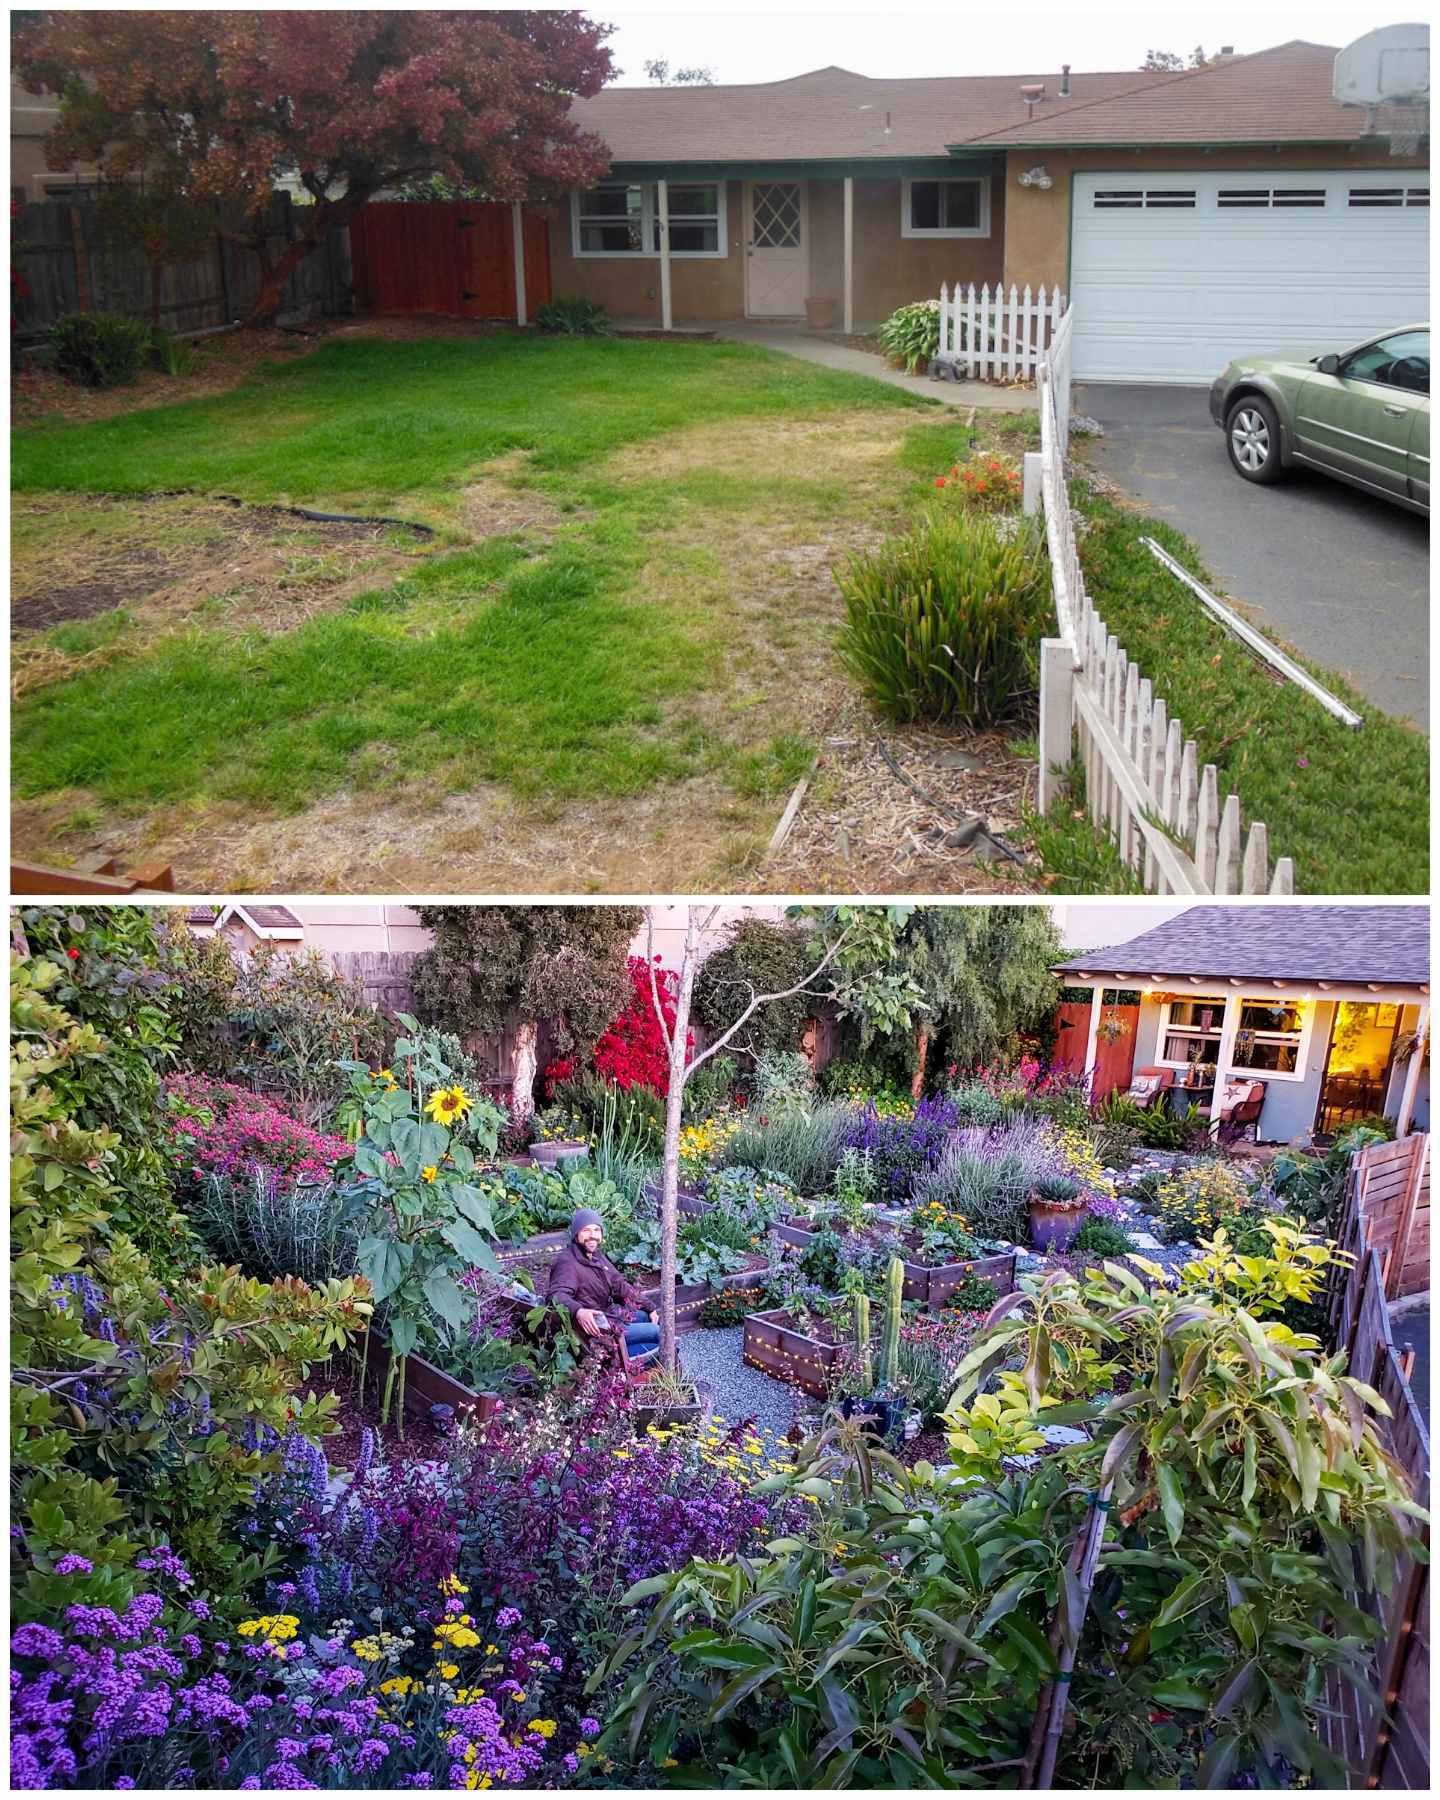 A two part image collage, the first image shows a front yard and front of a house. The yard consists of grass, weeds, and bare patches. The second image shows the same yard space years later, fully filled in with various fruit trees, pollinator plants, raised garden beds full of vegetables, and a new side fence. The yard and house are completely unrecognizable from the original picture. Attract birds to your garden by creating a complete ecosystem for plant and wildlife alike. 